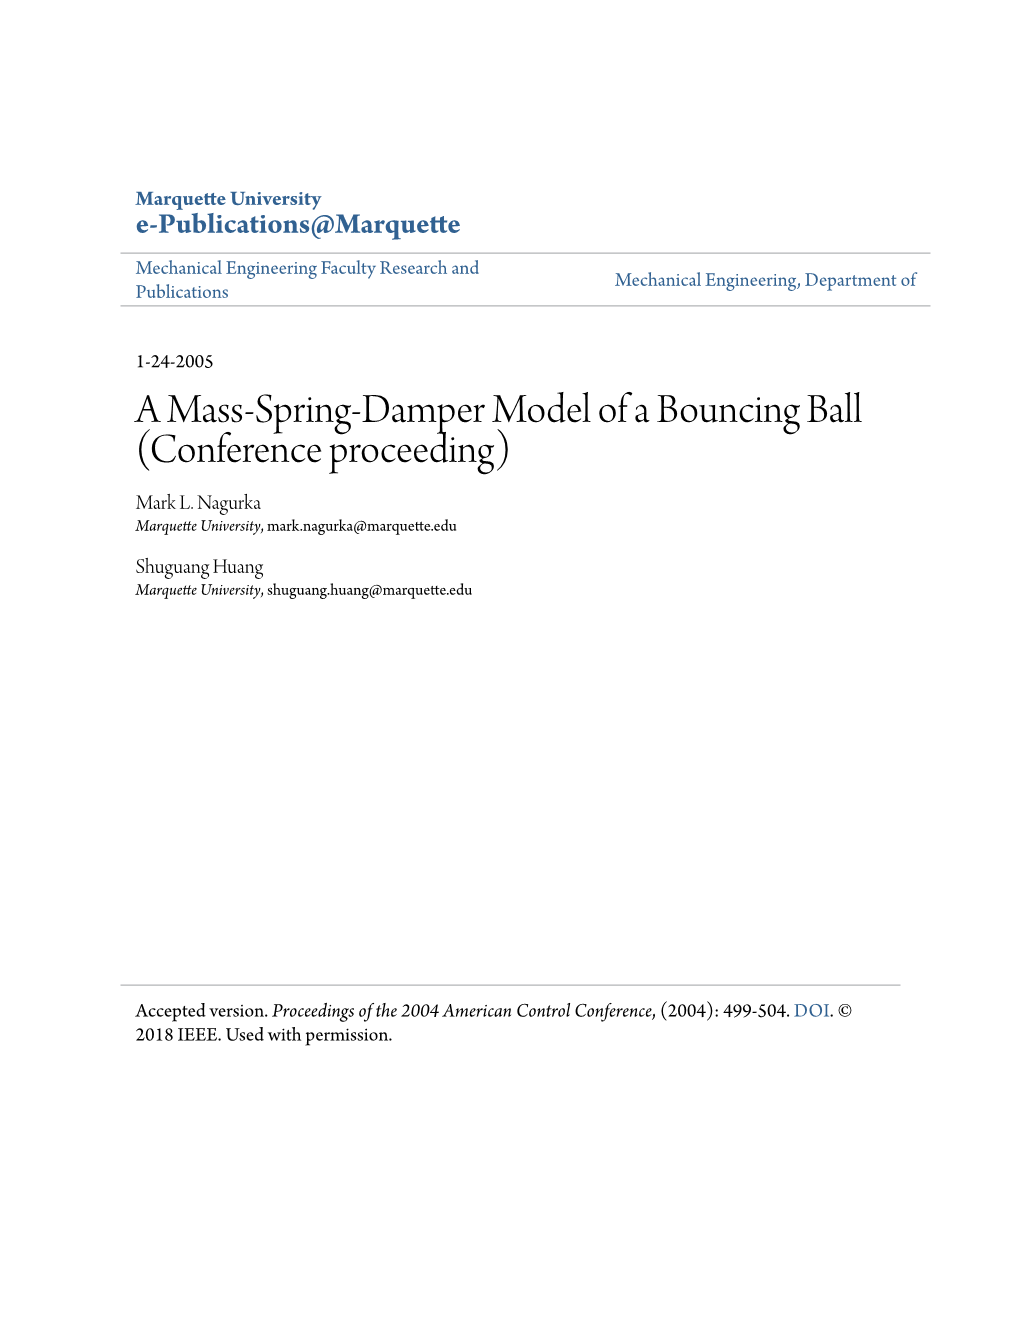 A Mass-Spring-Damper Model of a Bouncing Ball (Conference Proceeding) Mark L